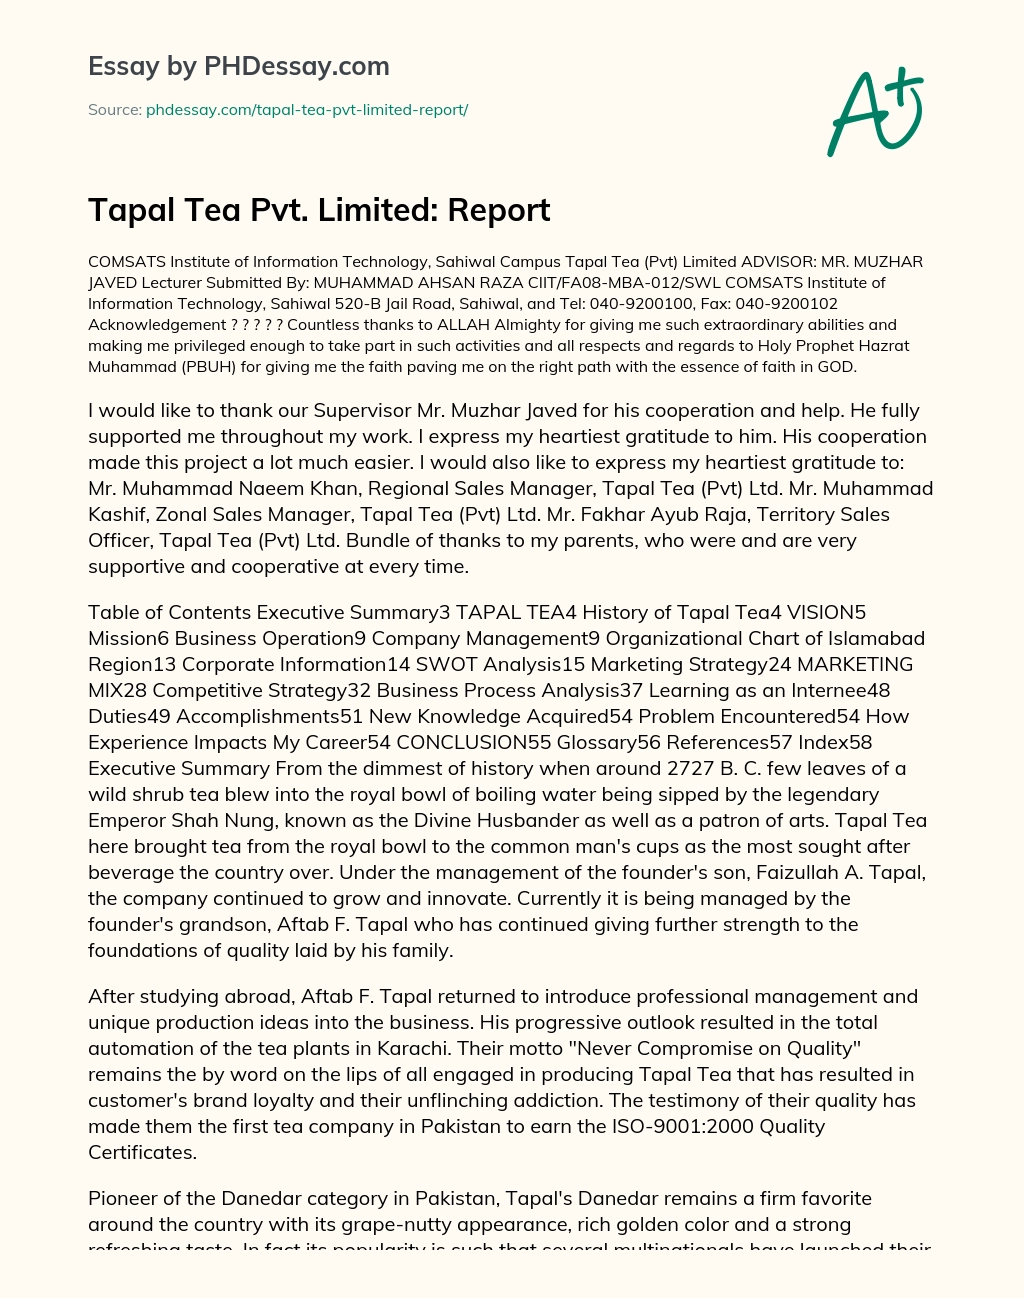 Tapal Tea Pvt. Limited: Report essay